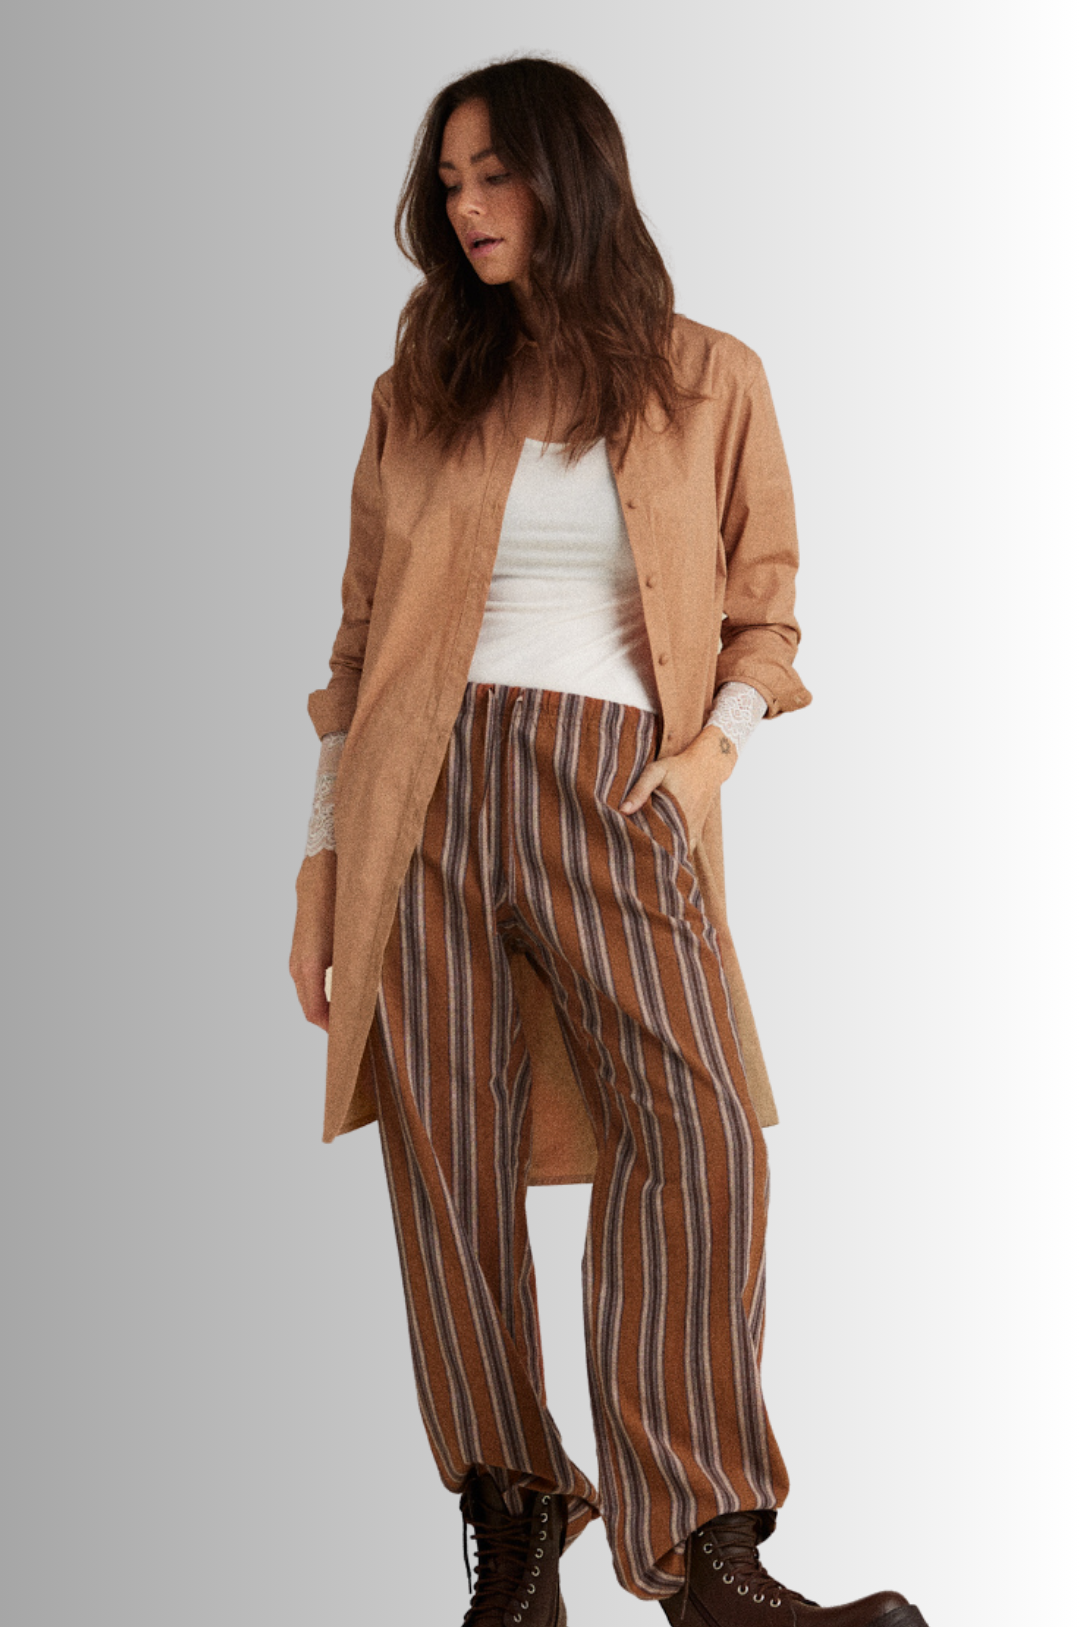 LUXZUZ // ONE TWO Elistri Pant Pant 218 Rustic Brown